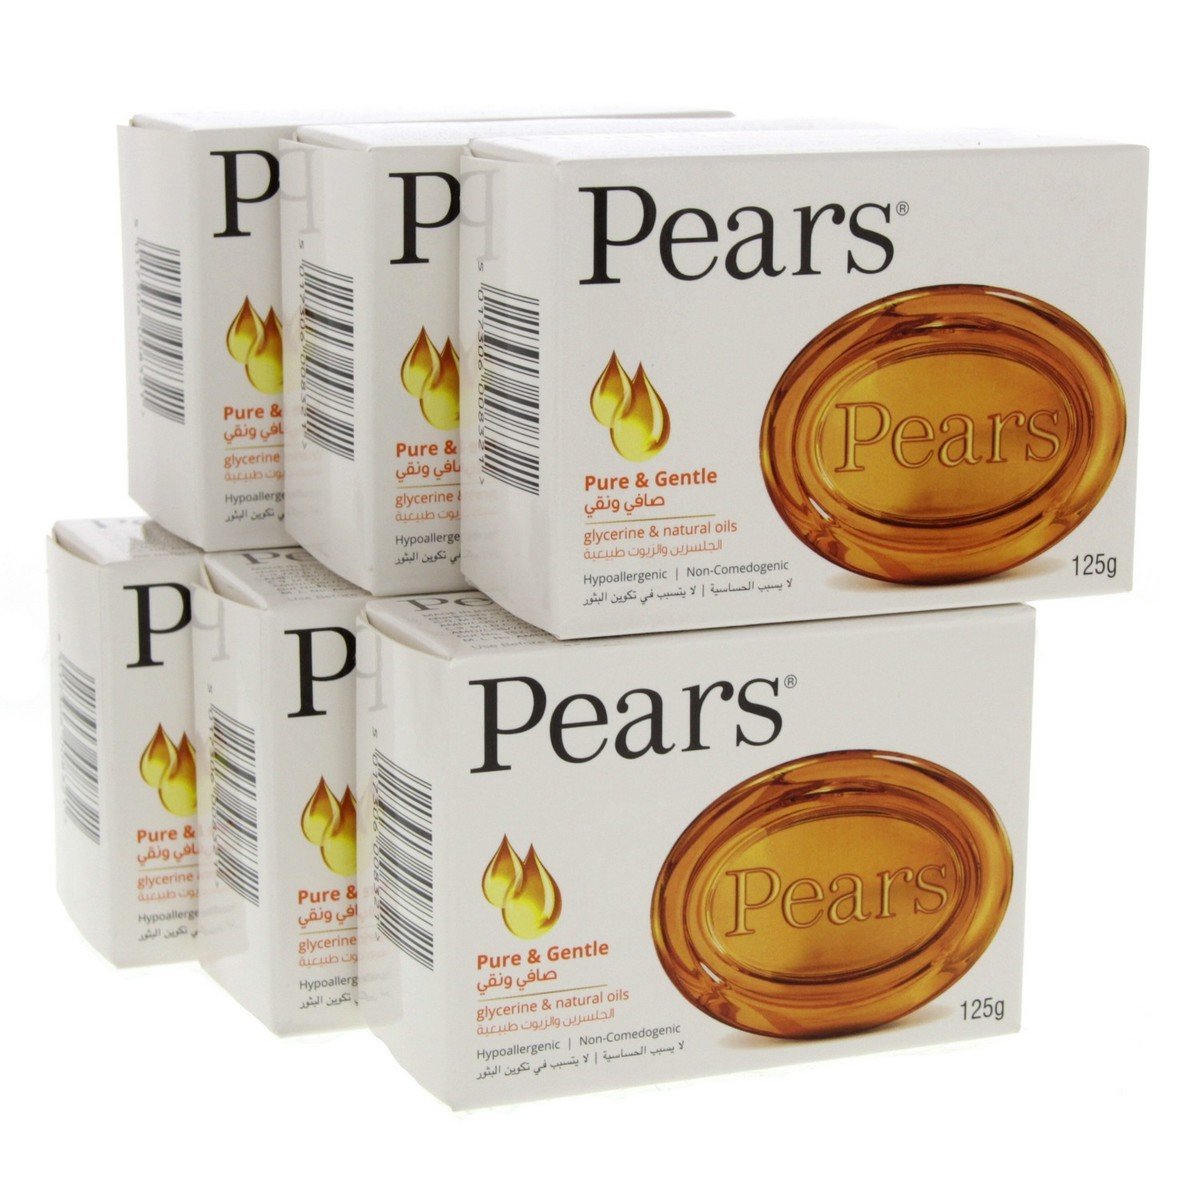 Pears Soap Pure and Gentle 125g x 6pcs